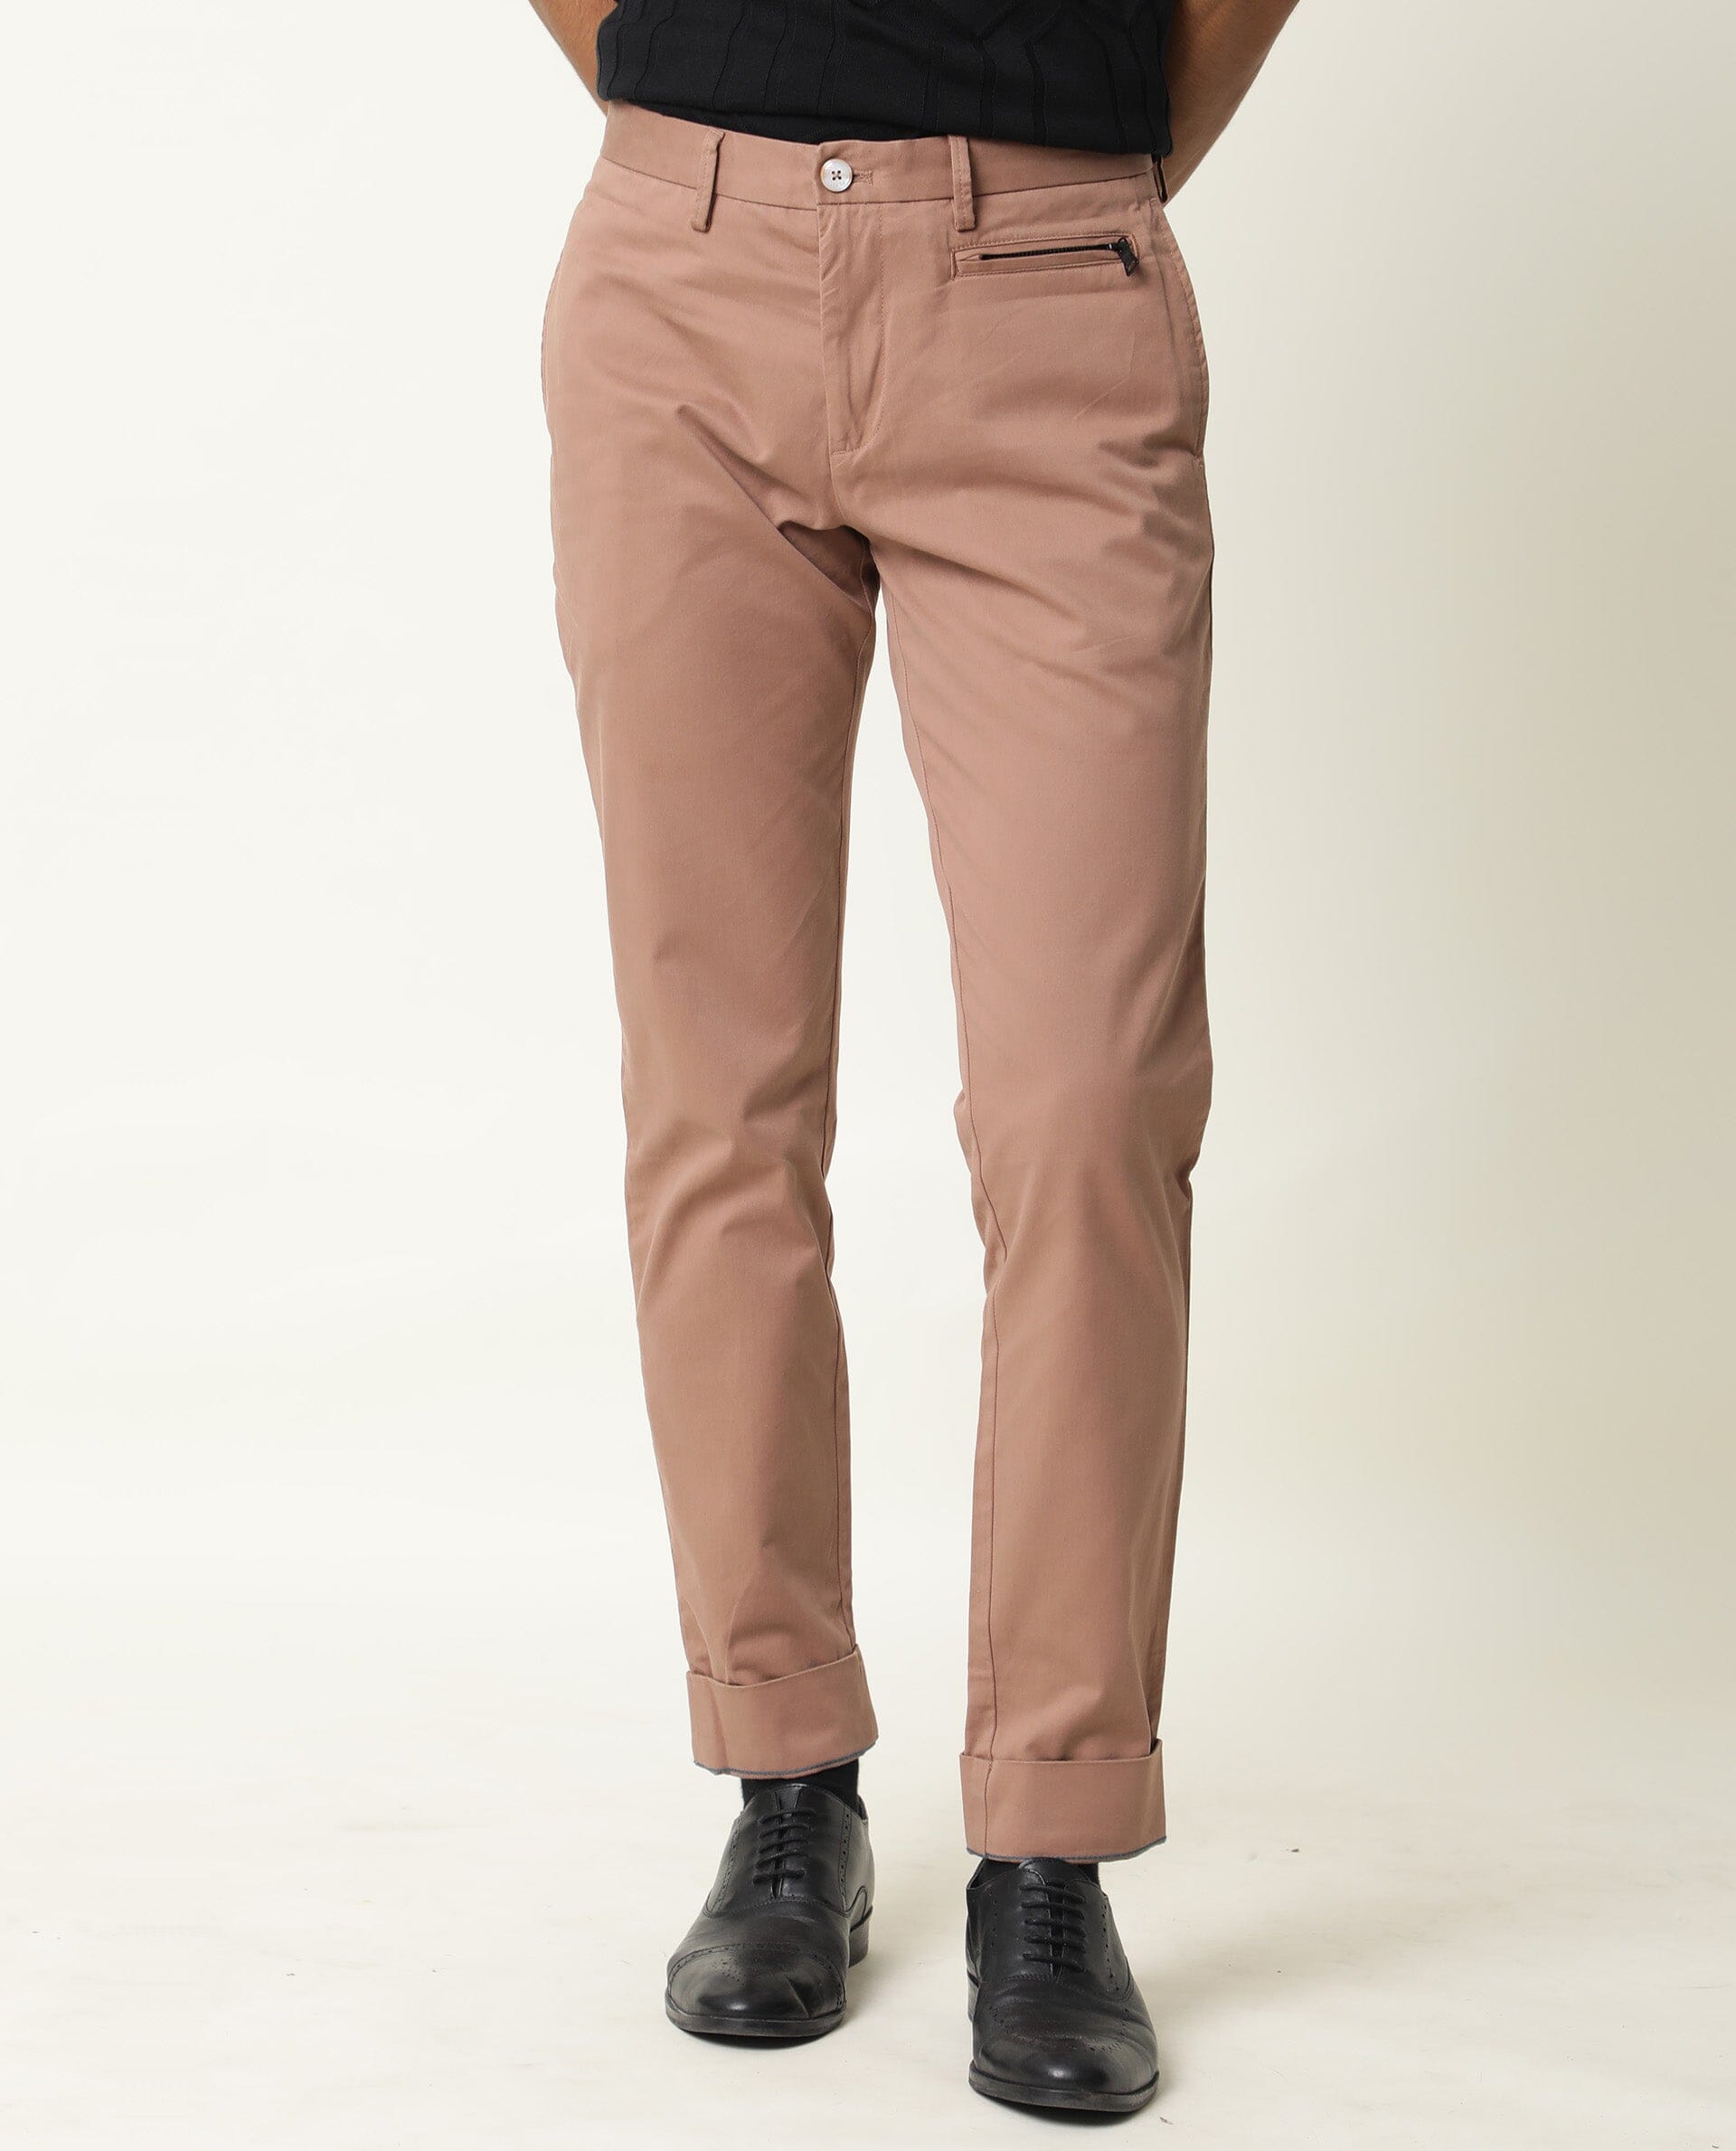 Cotton GREEN Men Chino Trousers, Casual Wear at Rs 630/piece in Bengaluru |  ID: 25184750073